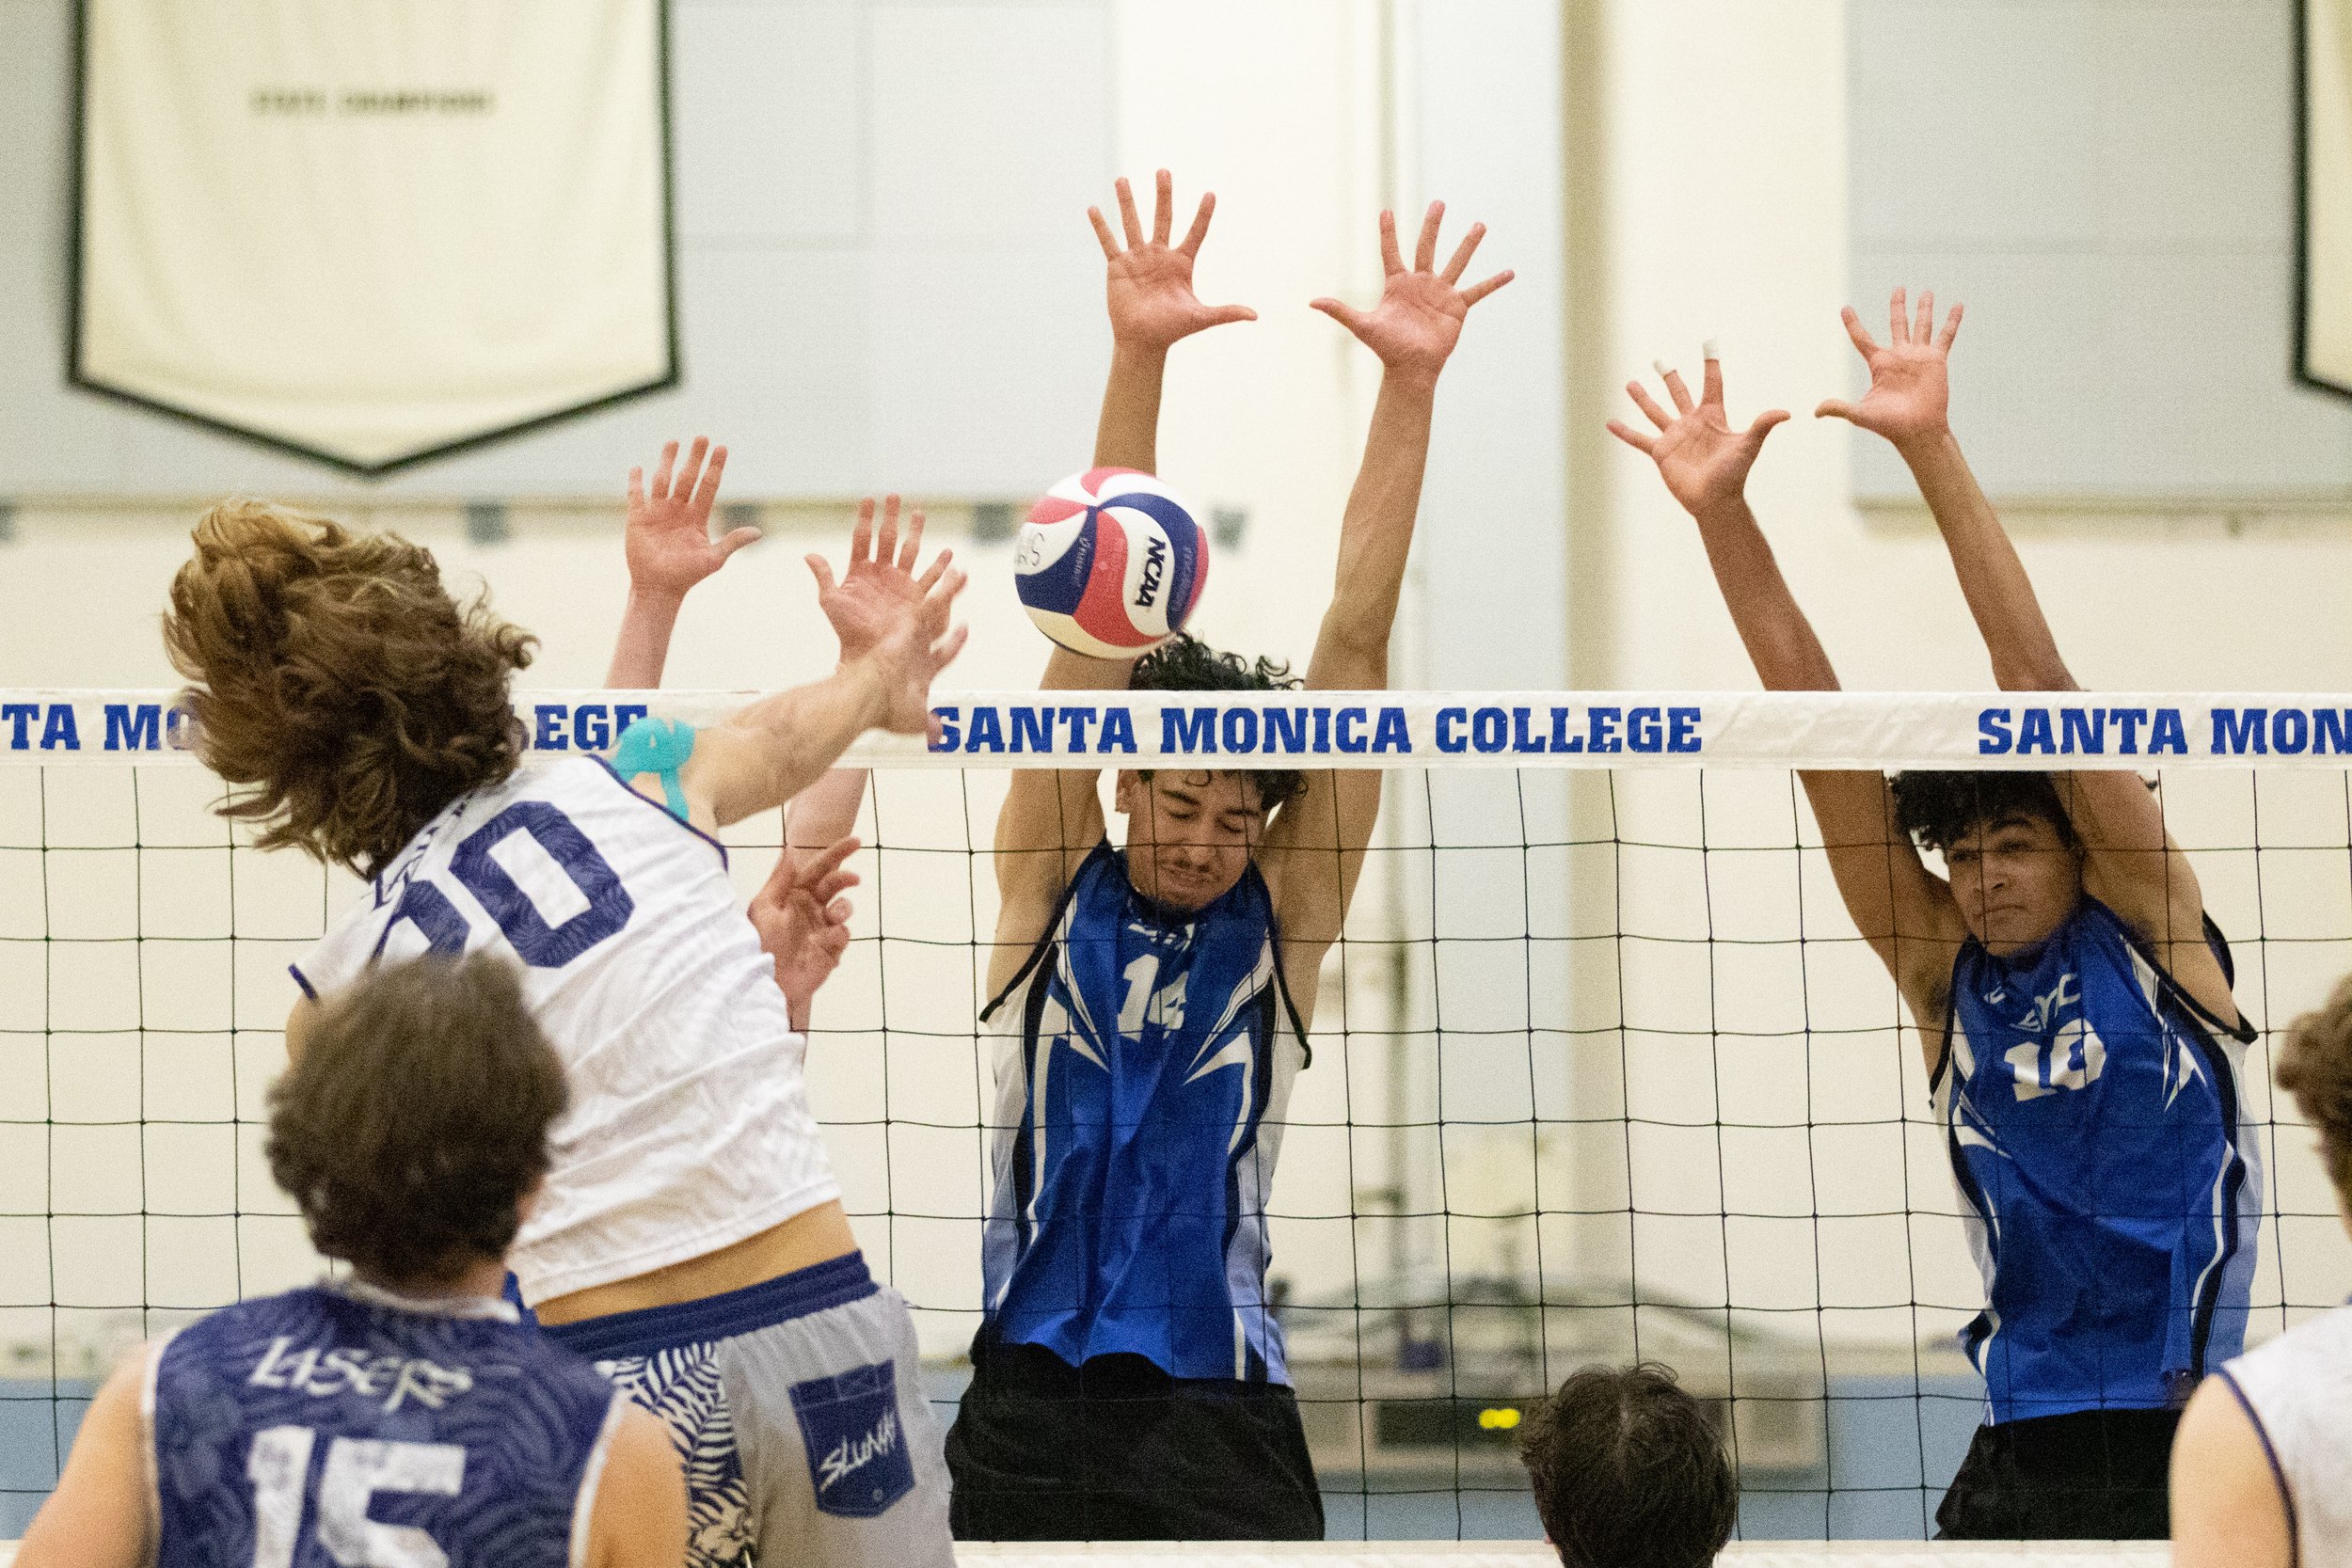  Santa Monica College Corsairs oppisite Luis Garzon (14, center) and outside hitter Nate Davis (10, right) attempt to block a kill by Irvine Valley College Laser outside hitter Andrew McFall (10, left) during the first set of a home game in Santa Mon